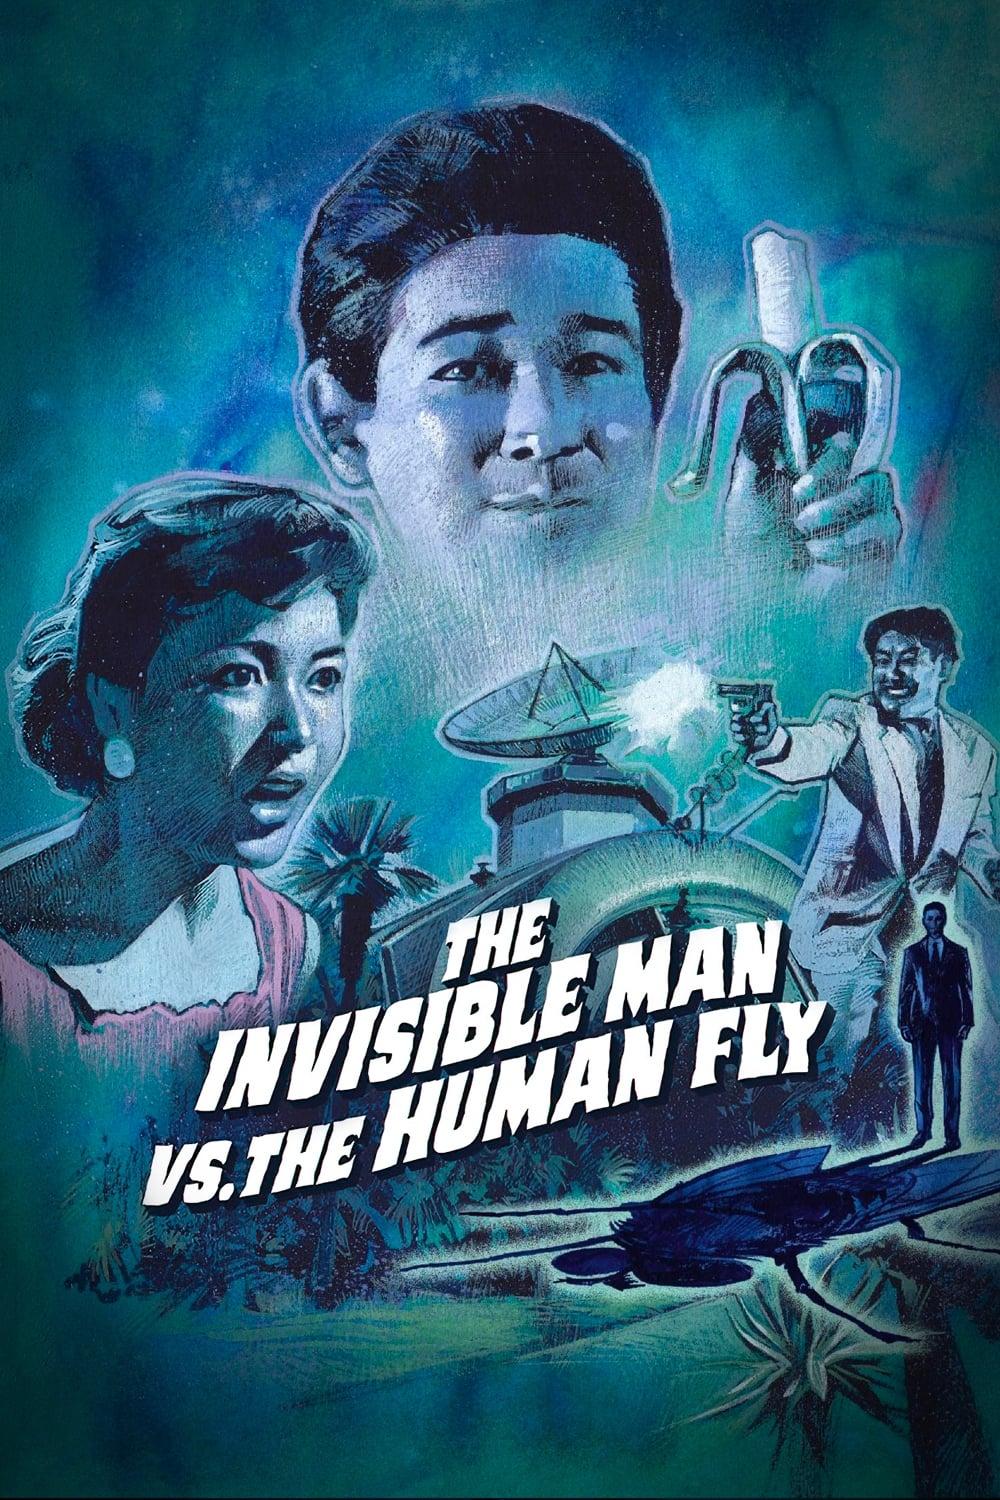 The Invisible Man vs. The Human Fly poster